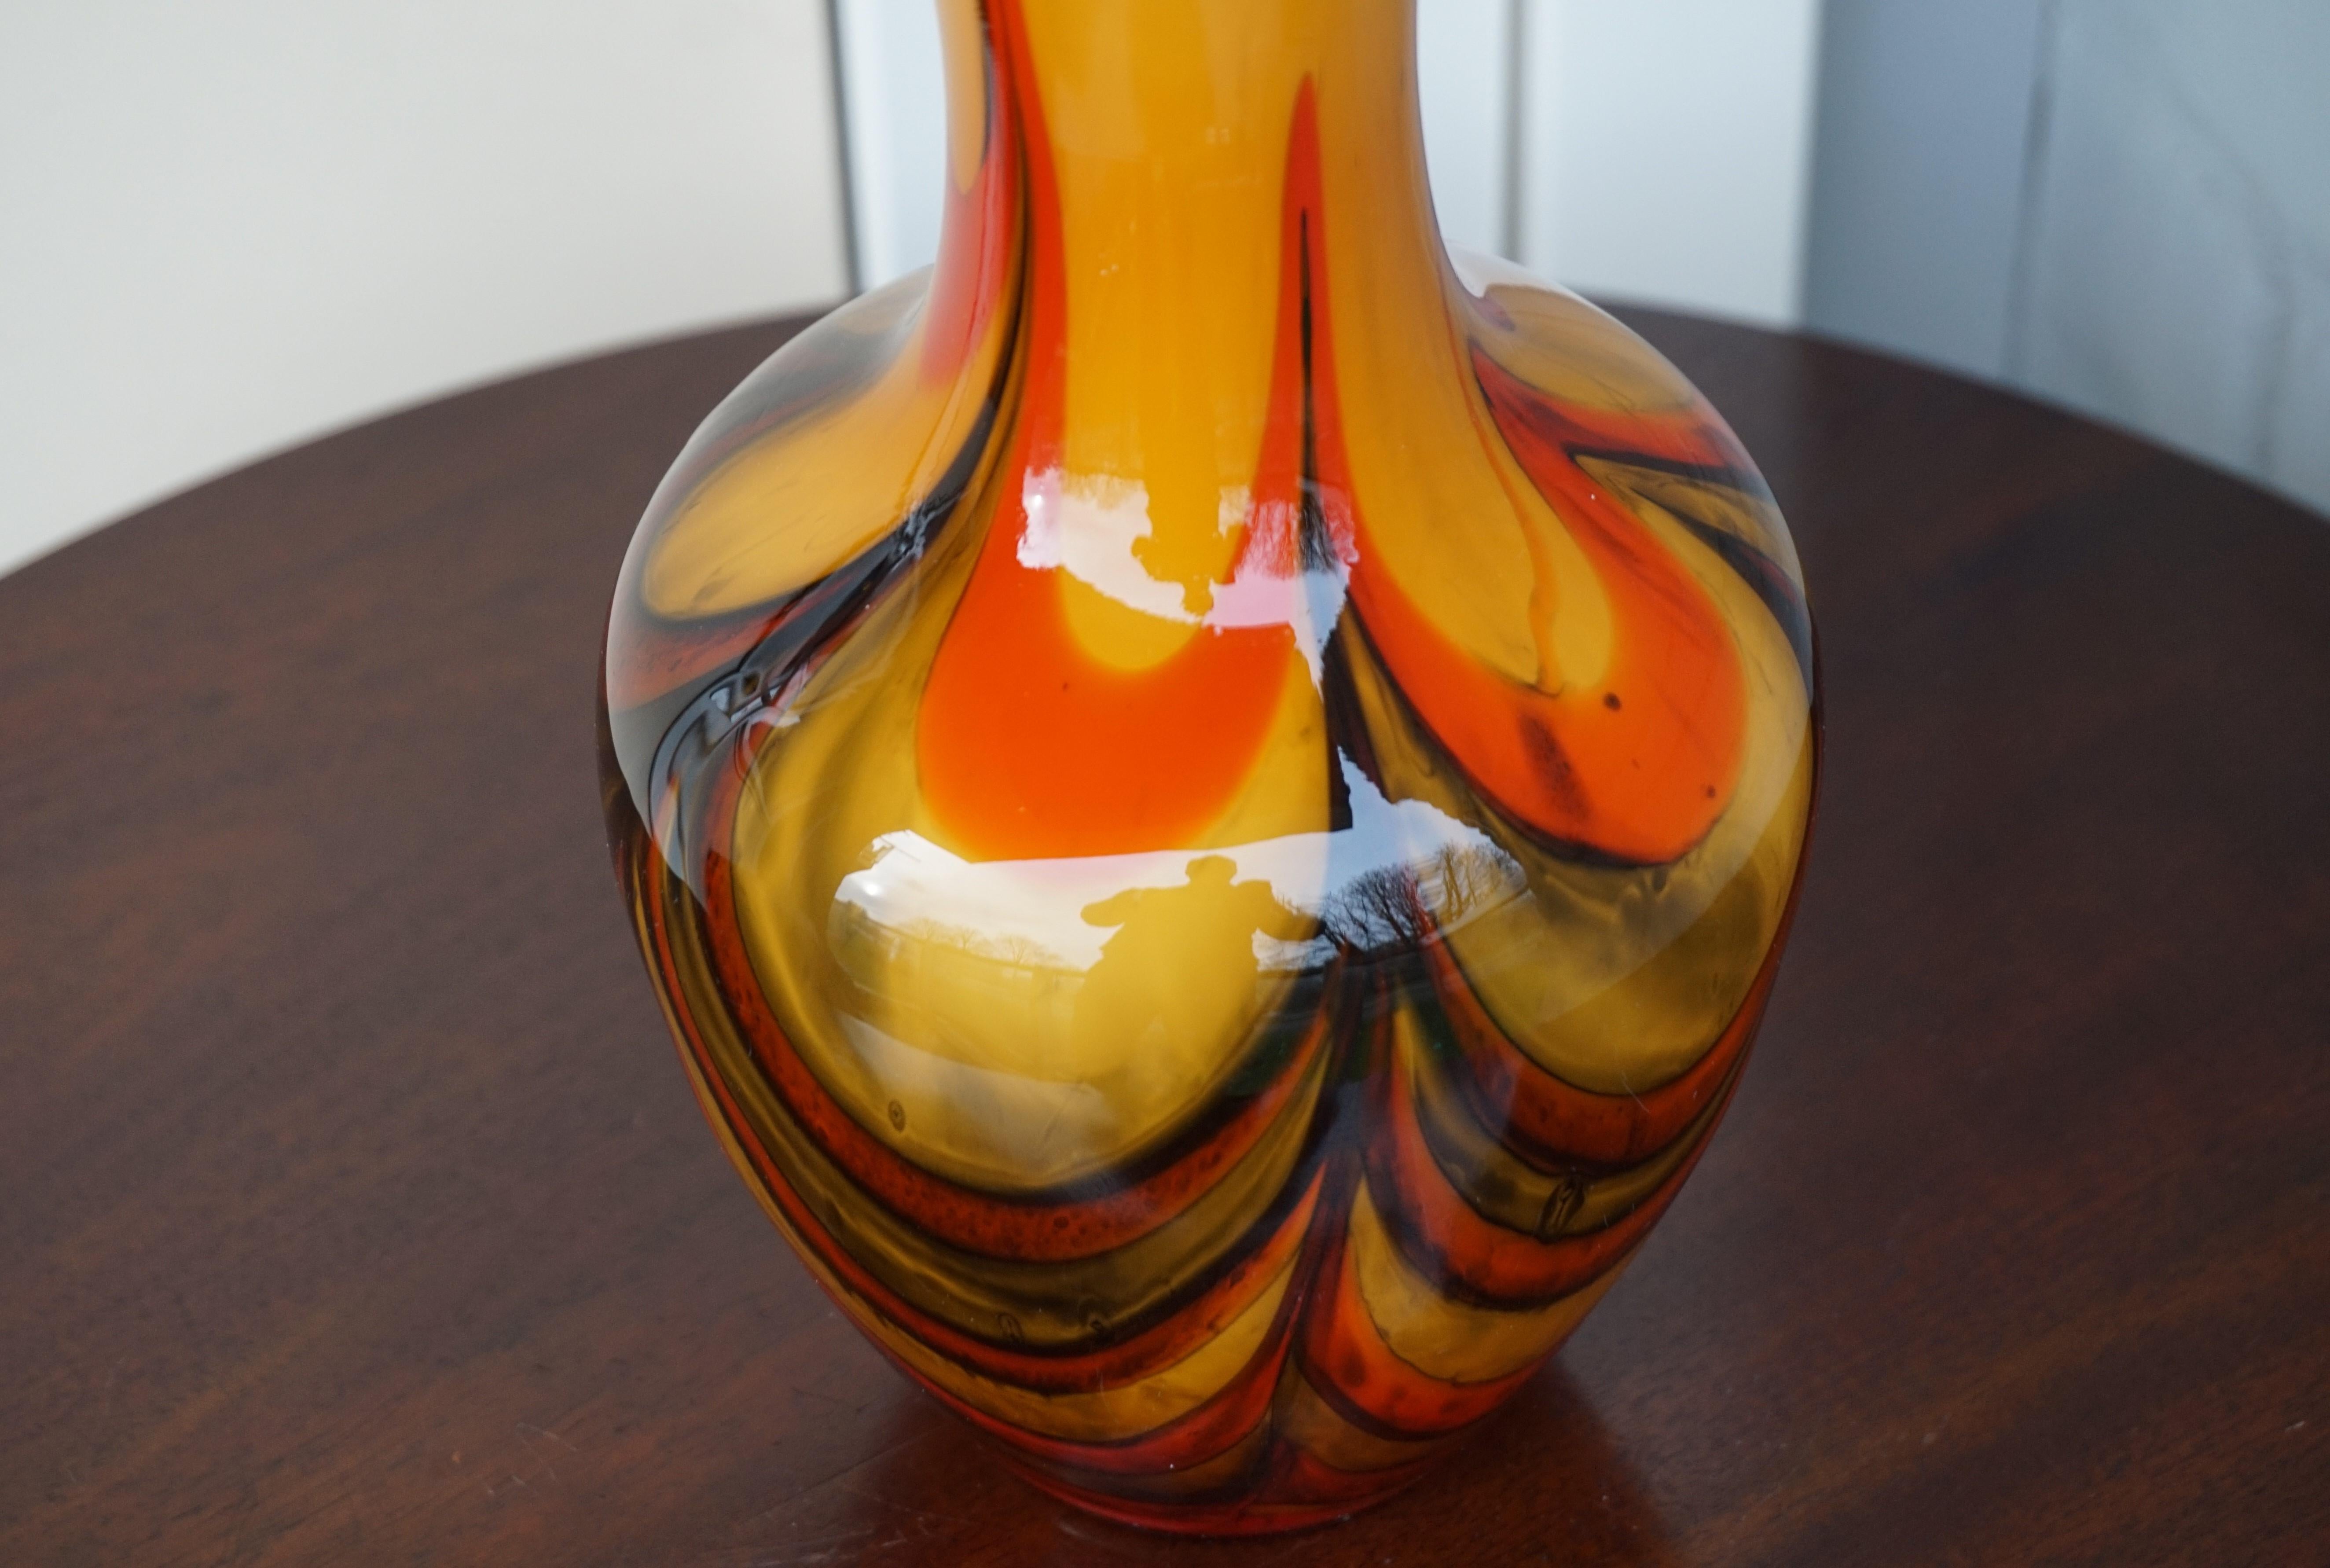 European Stunning and Mint Condition Arts & Crafts Style Glass Vase with Glorious Colors For Sale